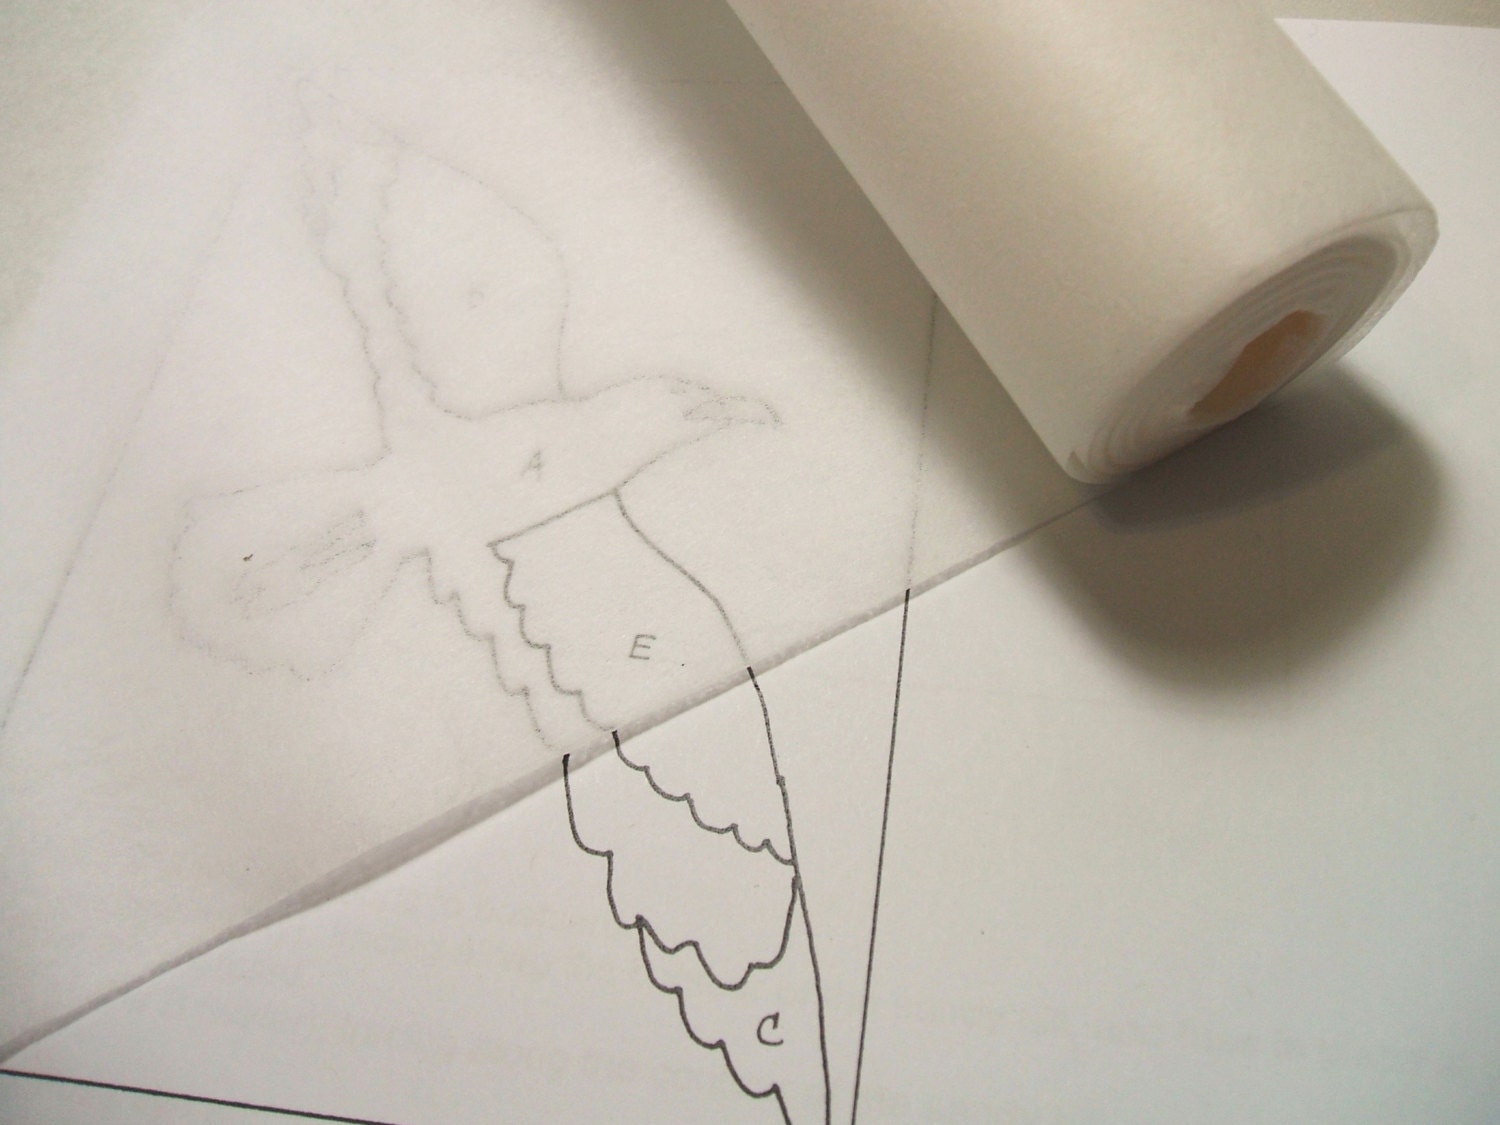 Dressmakers Tracing Paper, Carbon Paper, Clover Chacopy Tracing